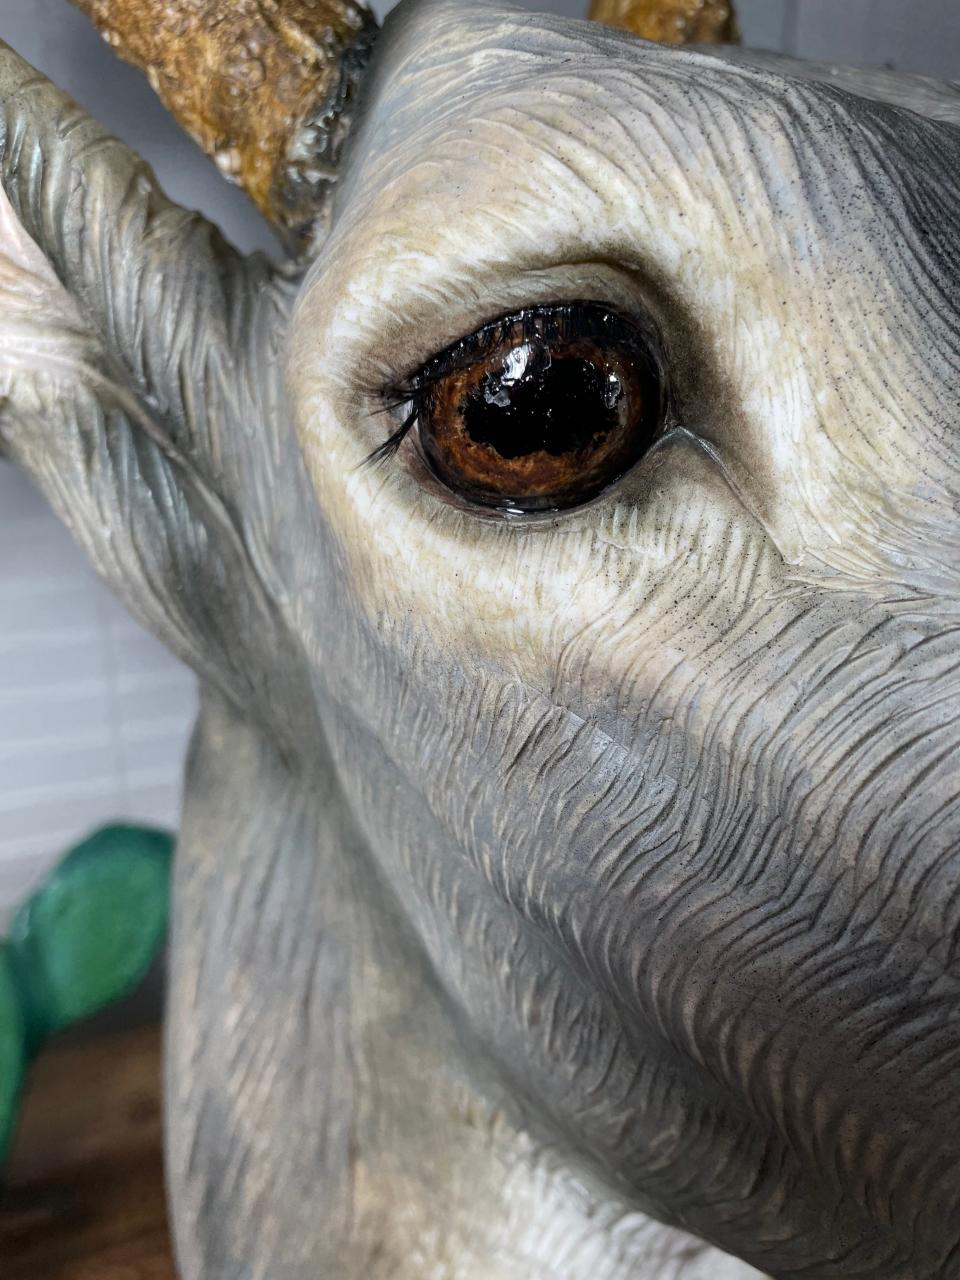 Dusty Sinclair of Corpus Christi, owner of Sugarbelle Sweets, uses taxidermy knowledge to create lifelike animal cakes using buttercream and modeling chocolate. Since 2020, Sinclair has specialized in creating realistic hunting and fishing inspired cakes for weddings and large events.